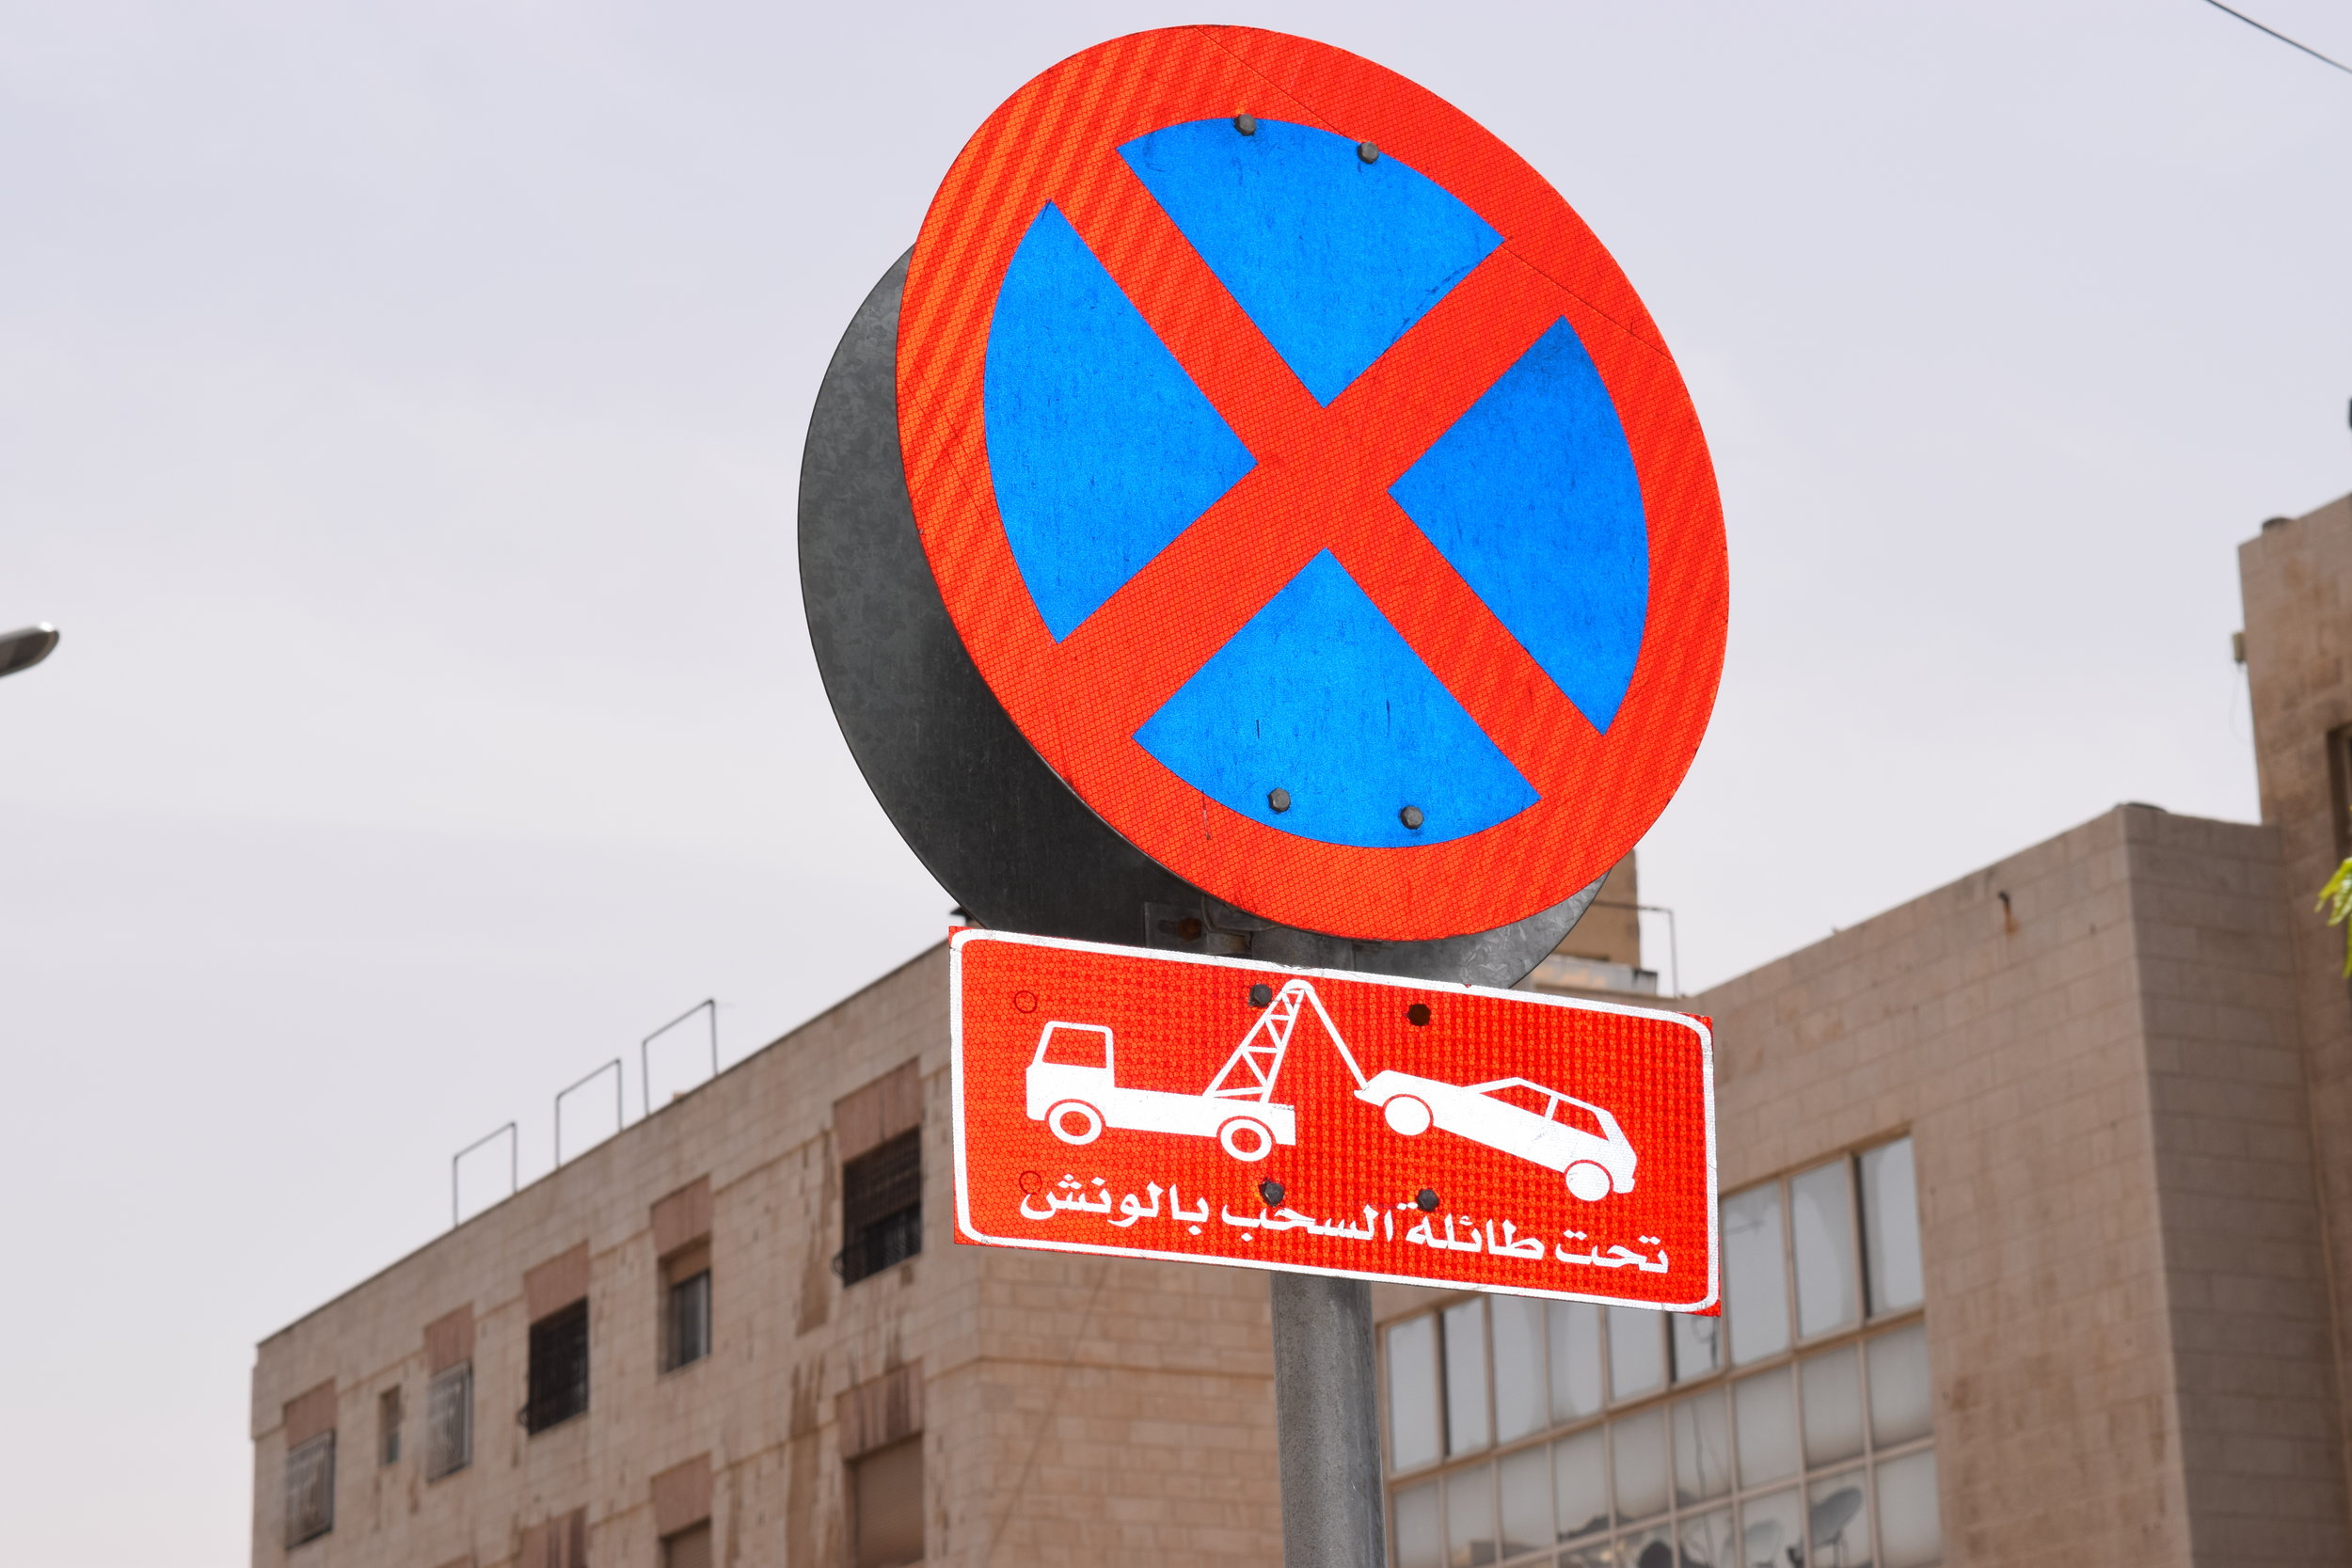  1.&nbsp;&nbsp;&nbsp;&nbsp; A warning sign indicating that cars parked in the no-parking zone will be towed. 